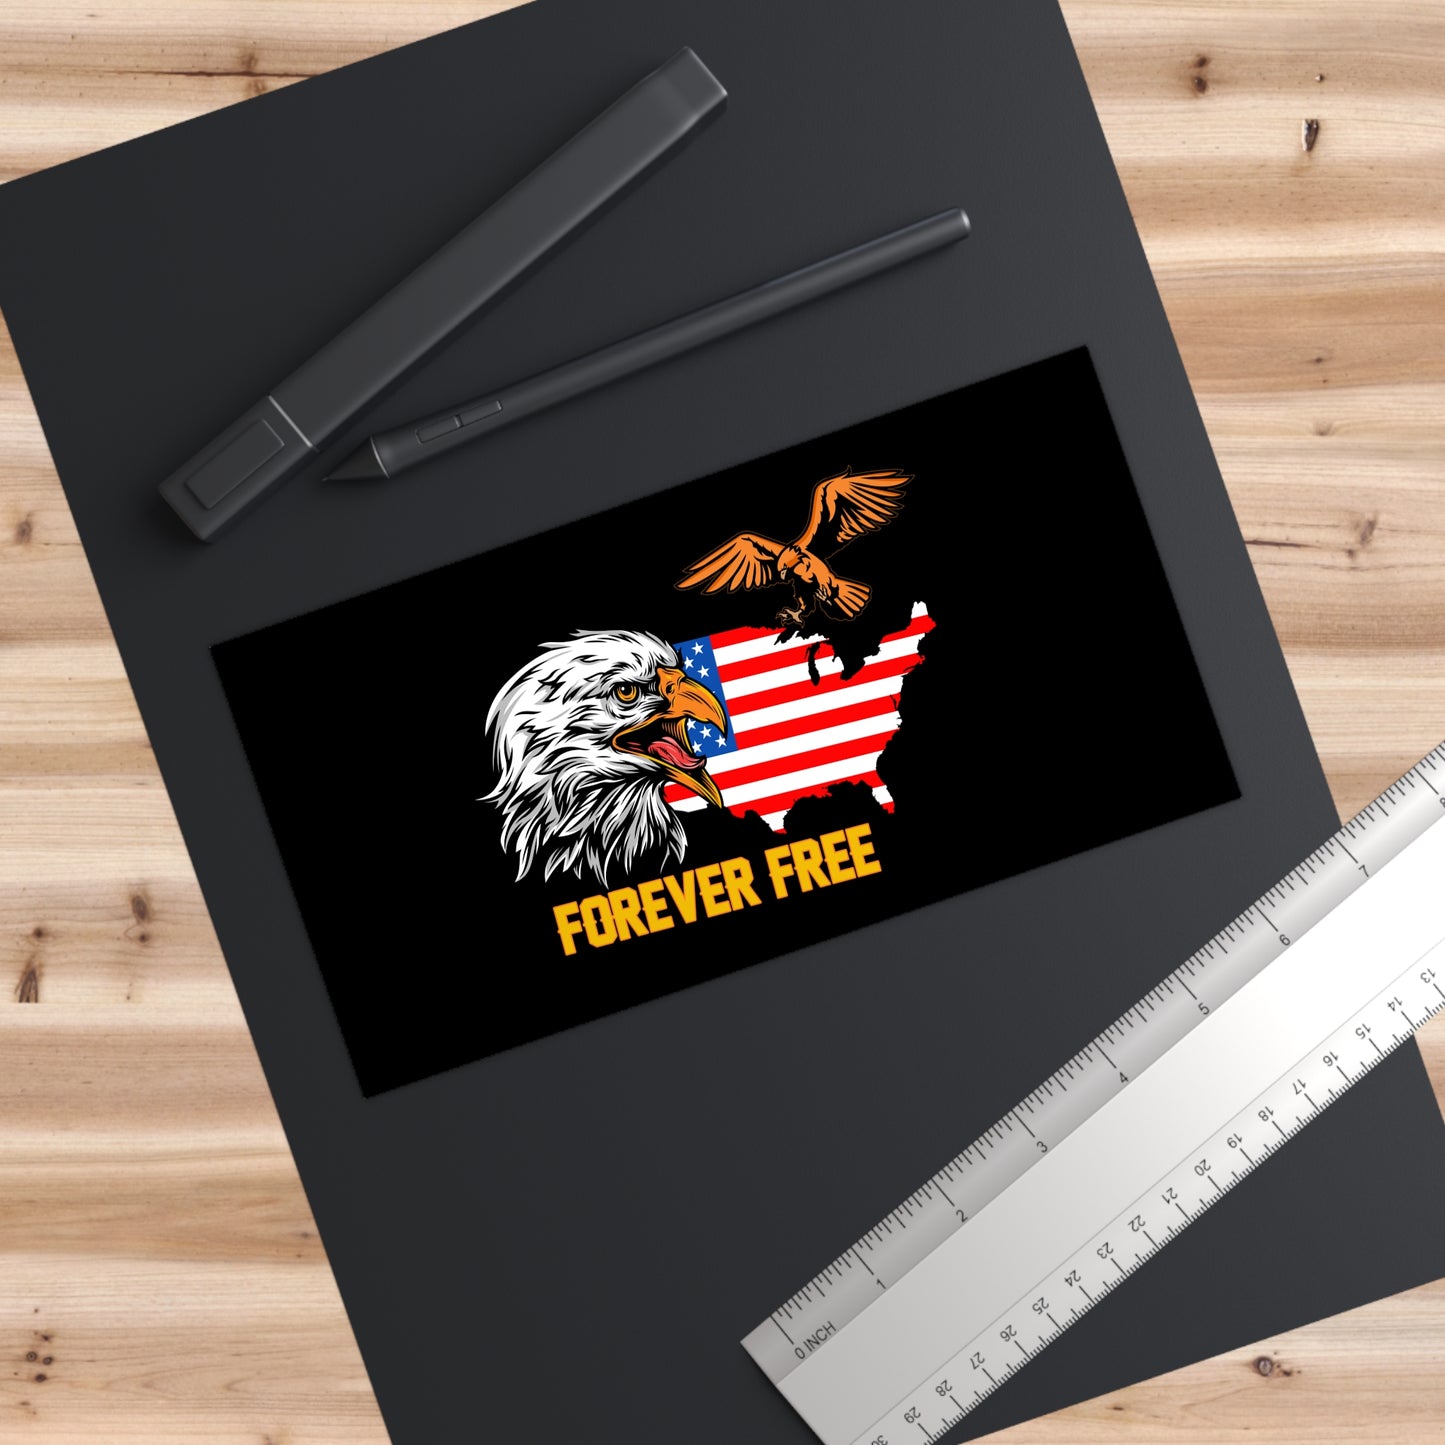 Forever Free American Patriots Bumper Stickers